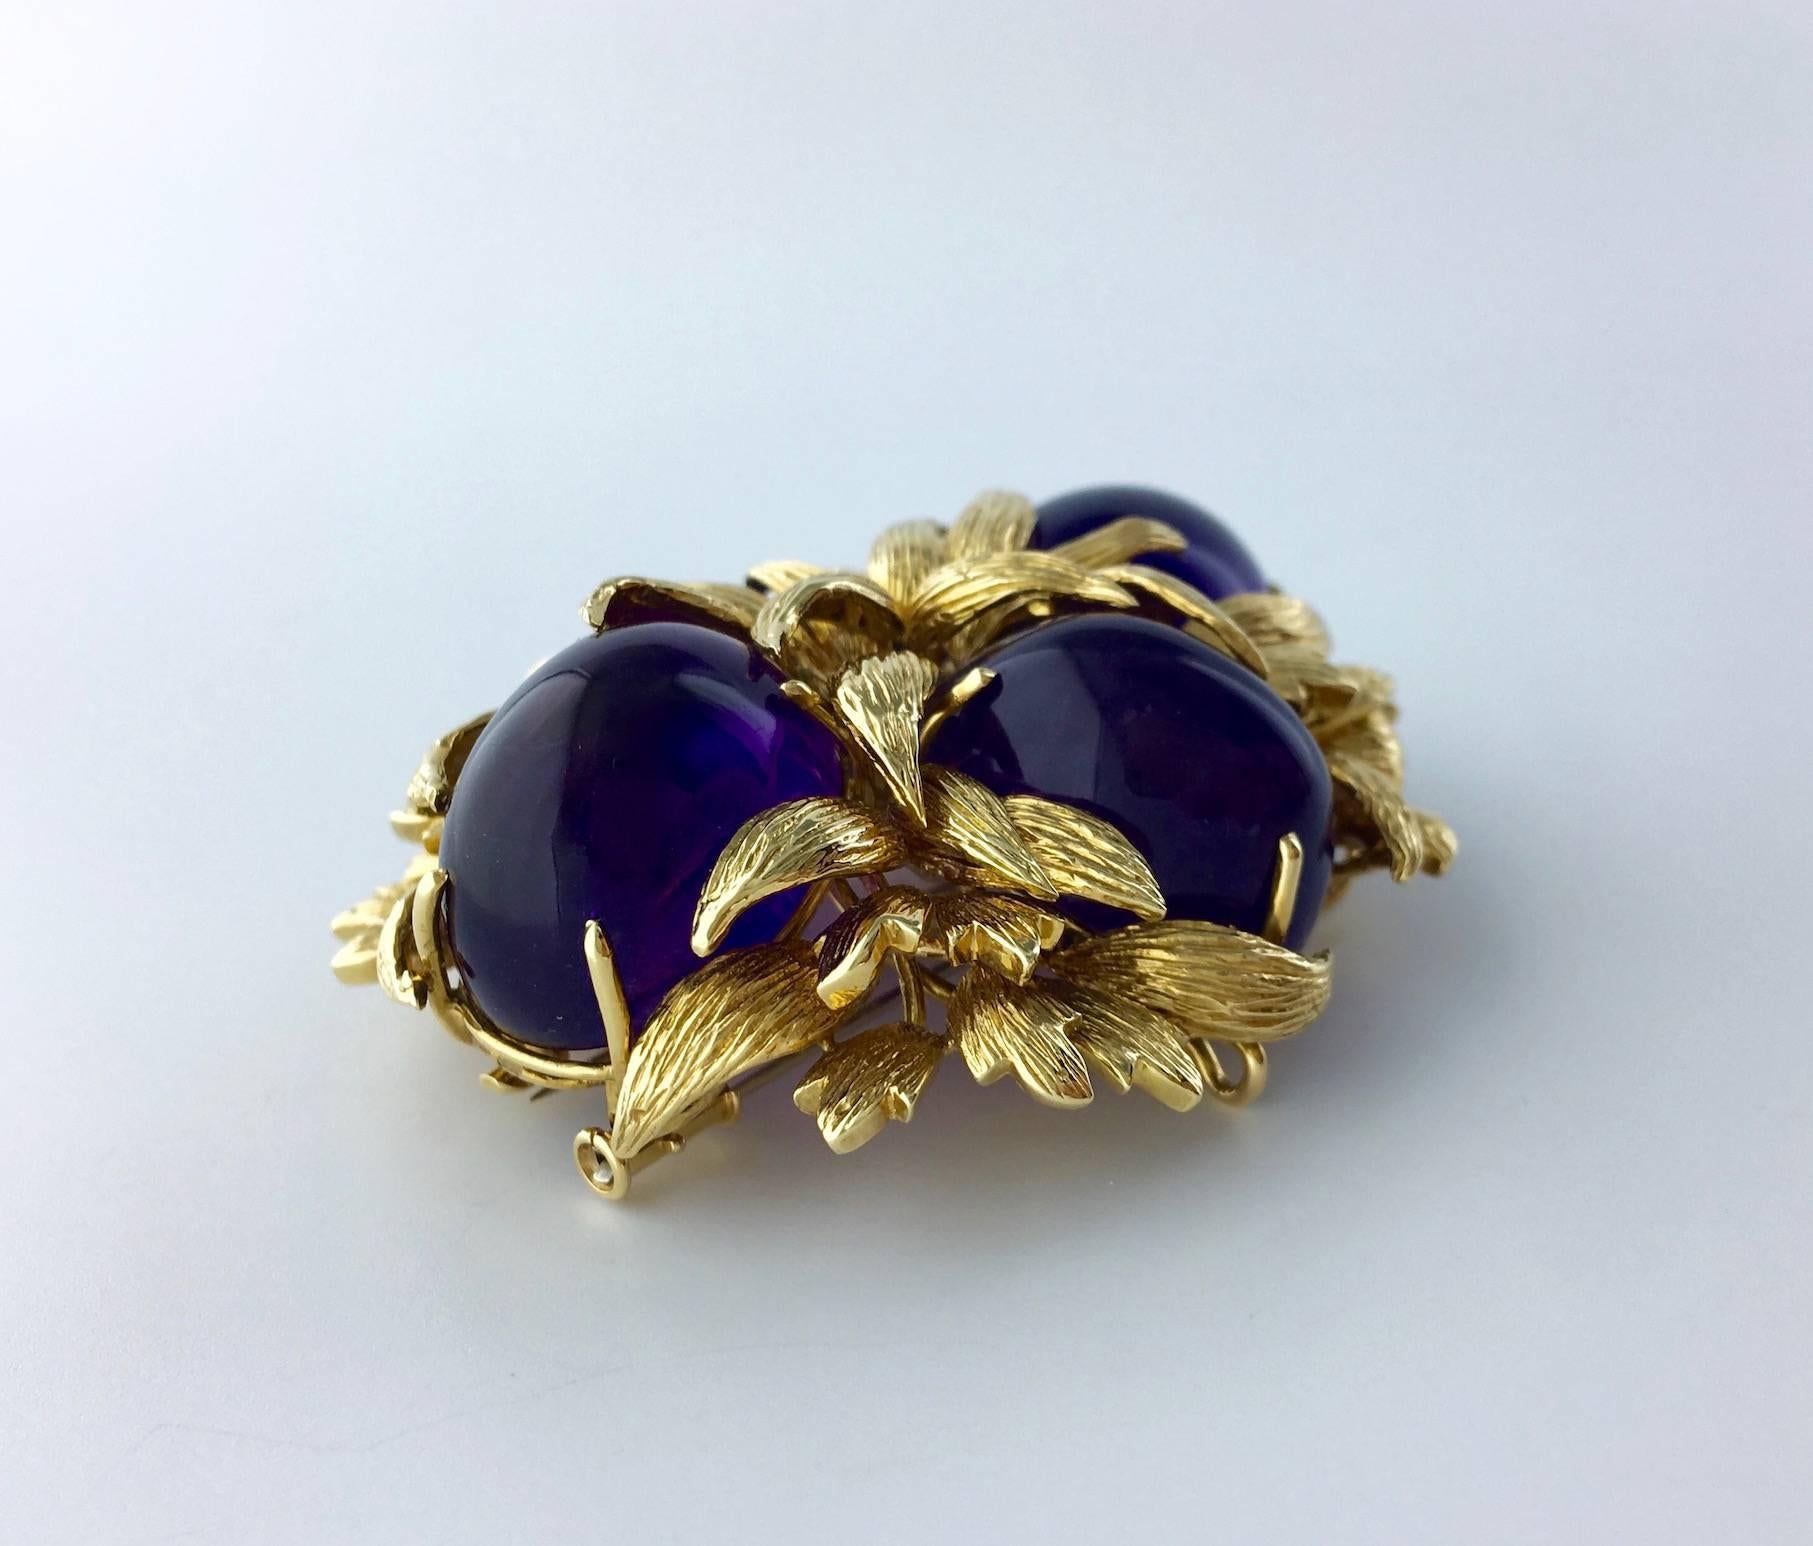 Impressive yellow gold brooch convertible in pendant with four cabochon Amethysts.
Signed David Webb.